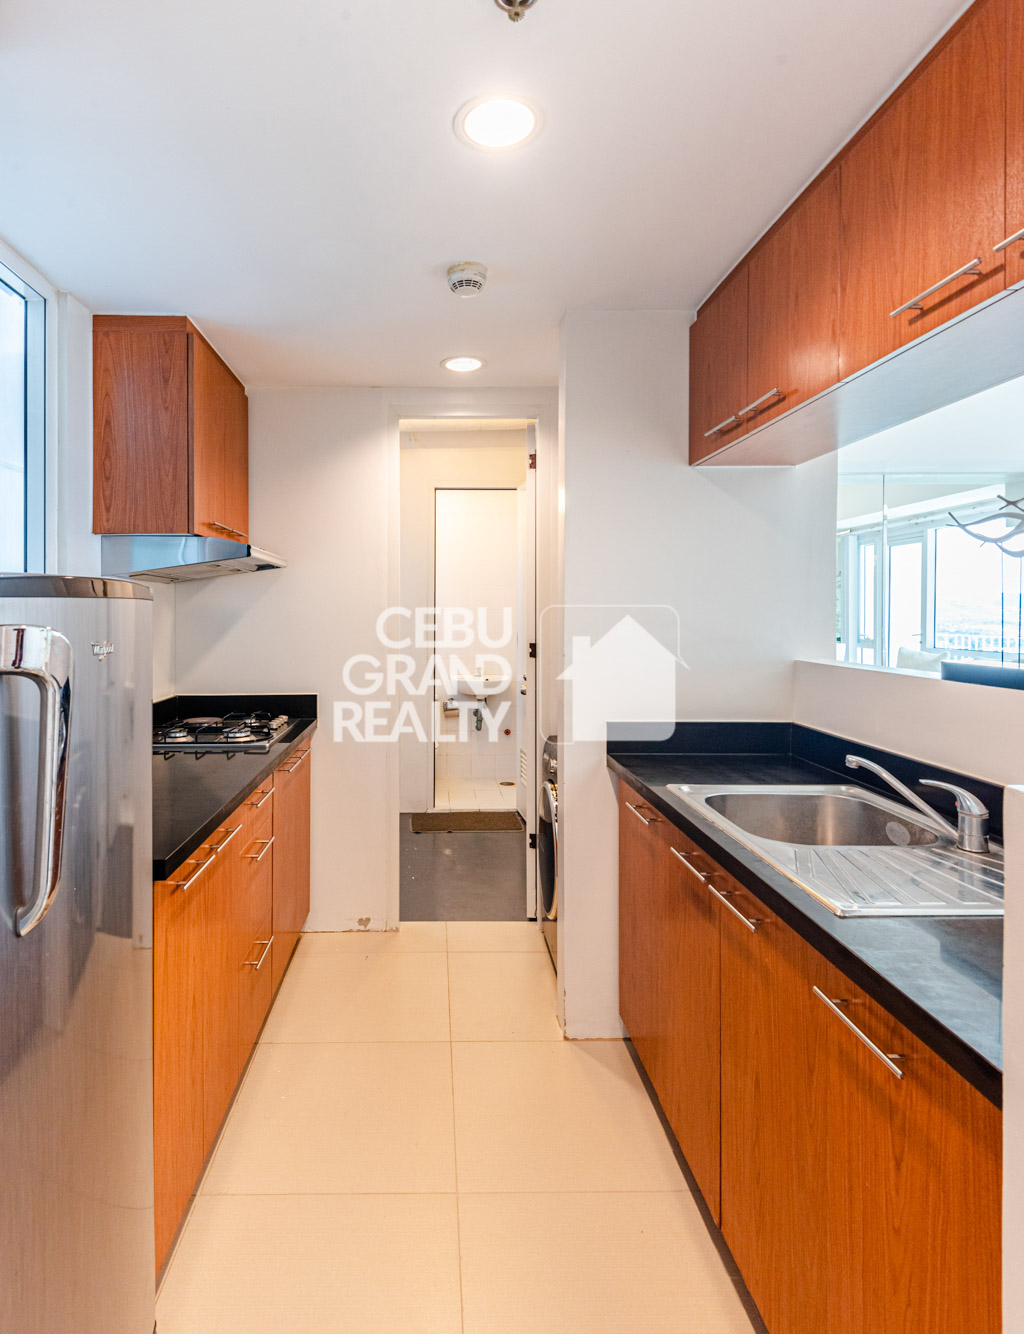 RCMP14 Furnished 2 Bedroom Condo for Rent in Marco Polo Residences - Cebu Grand Realty (6)